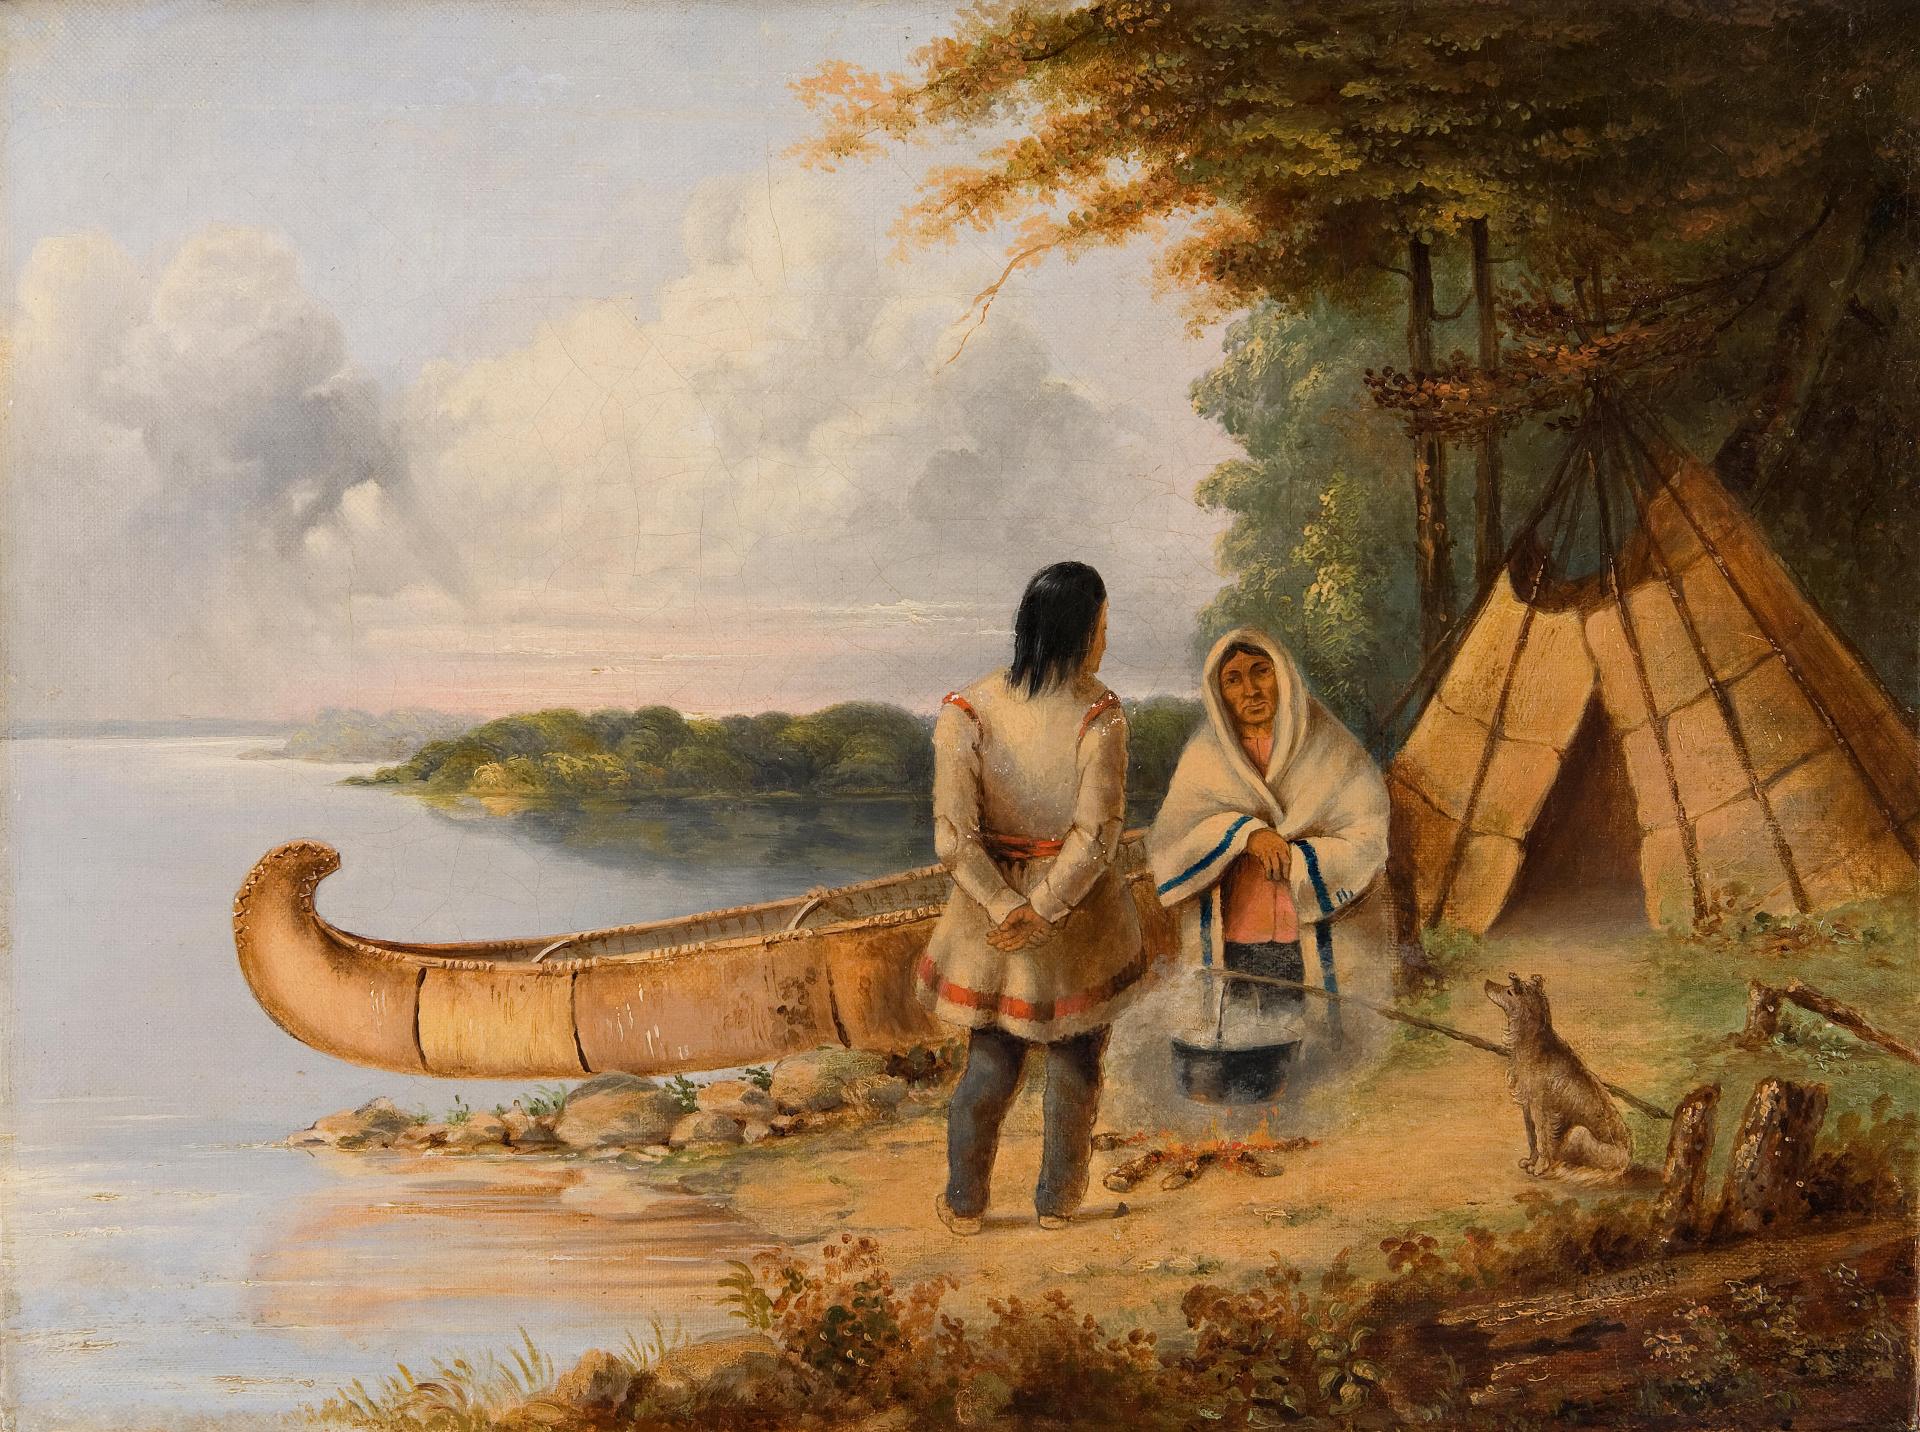 Cornelius David Krieghoff (1815-1872) - Indian Encampment with canoe, two figures and a dog